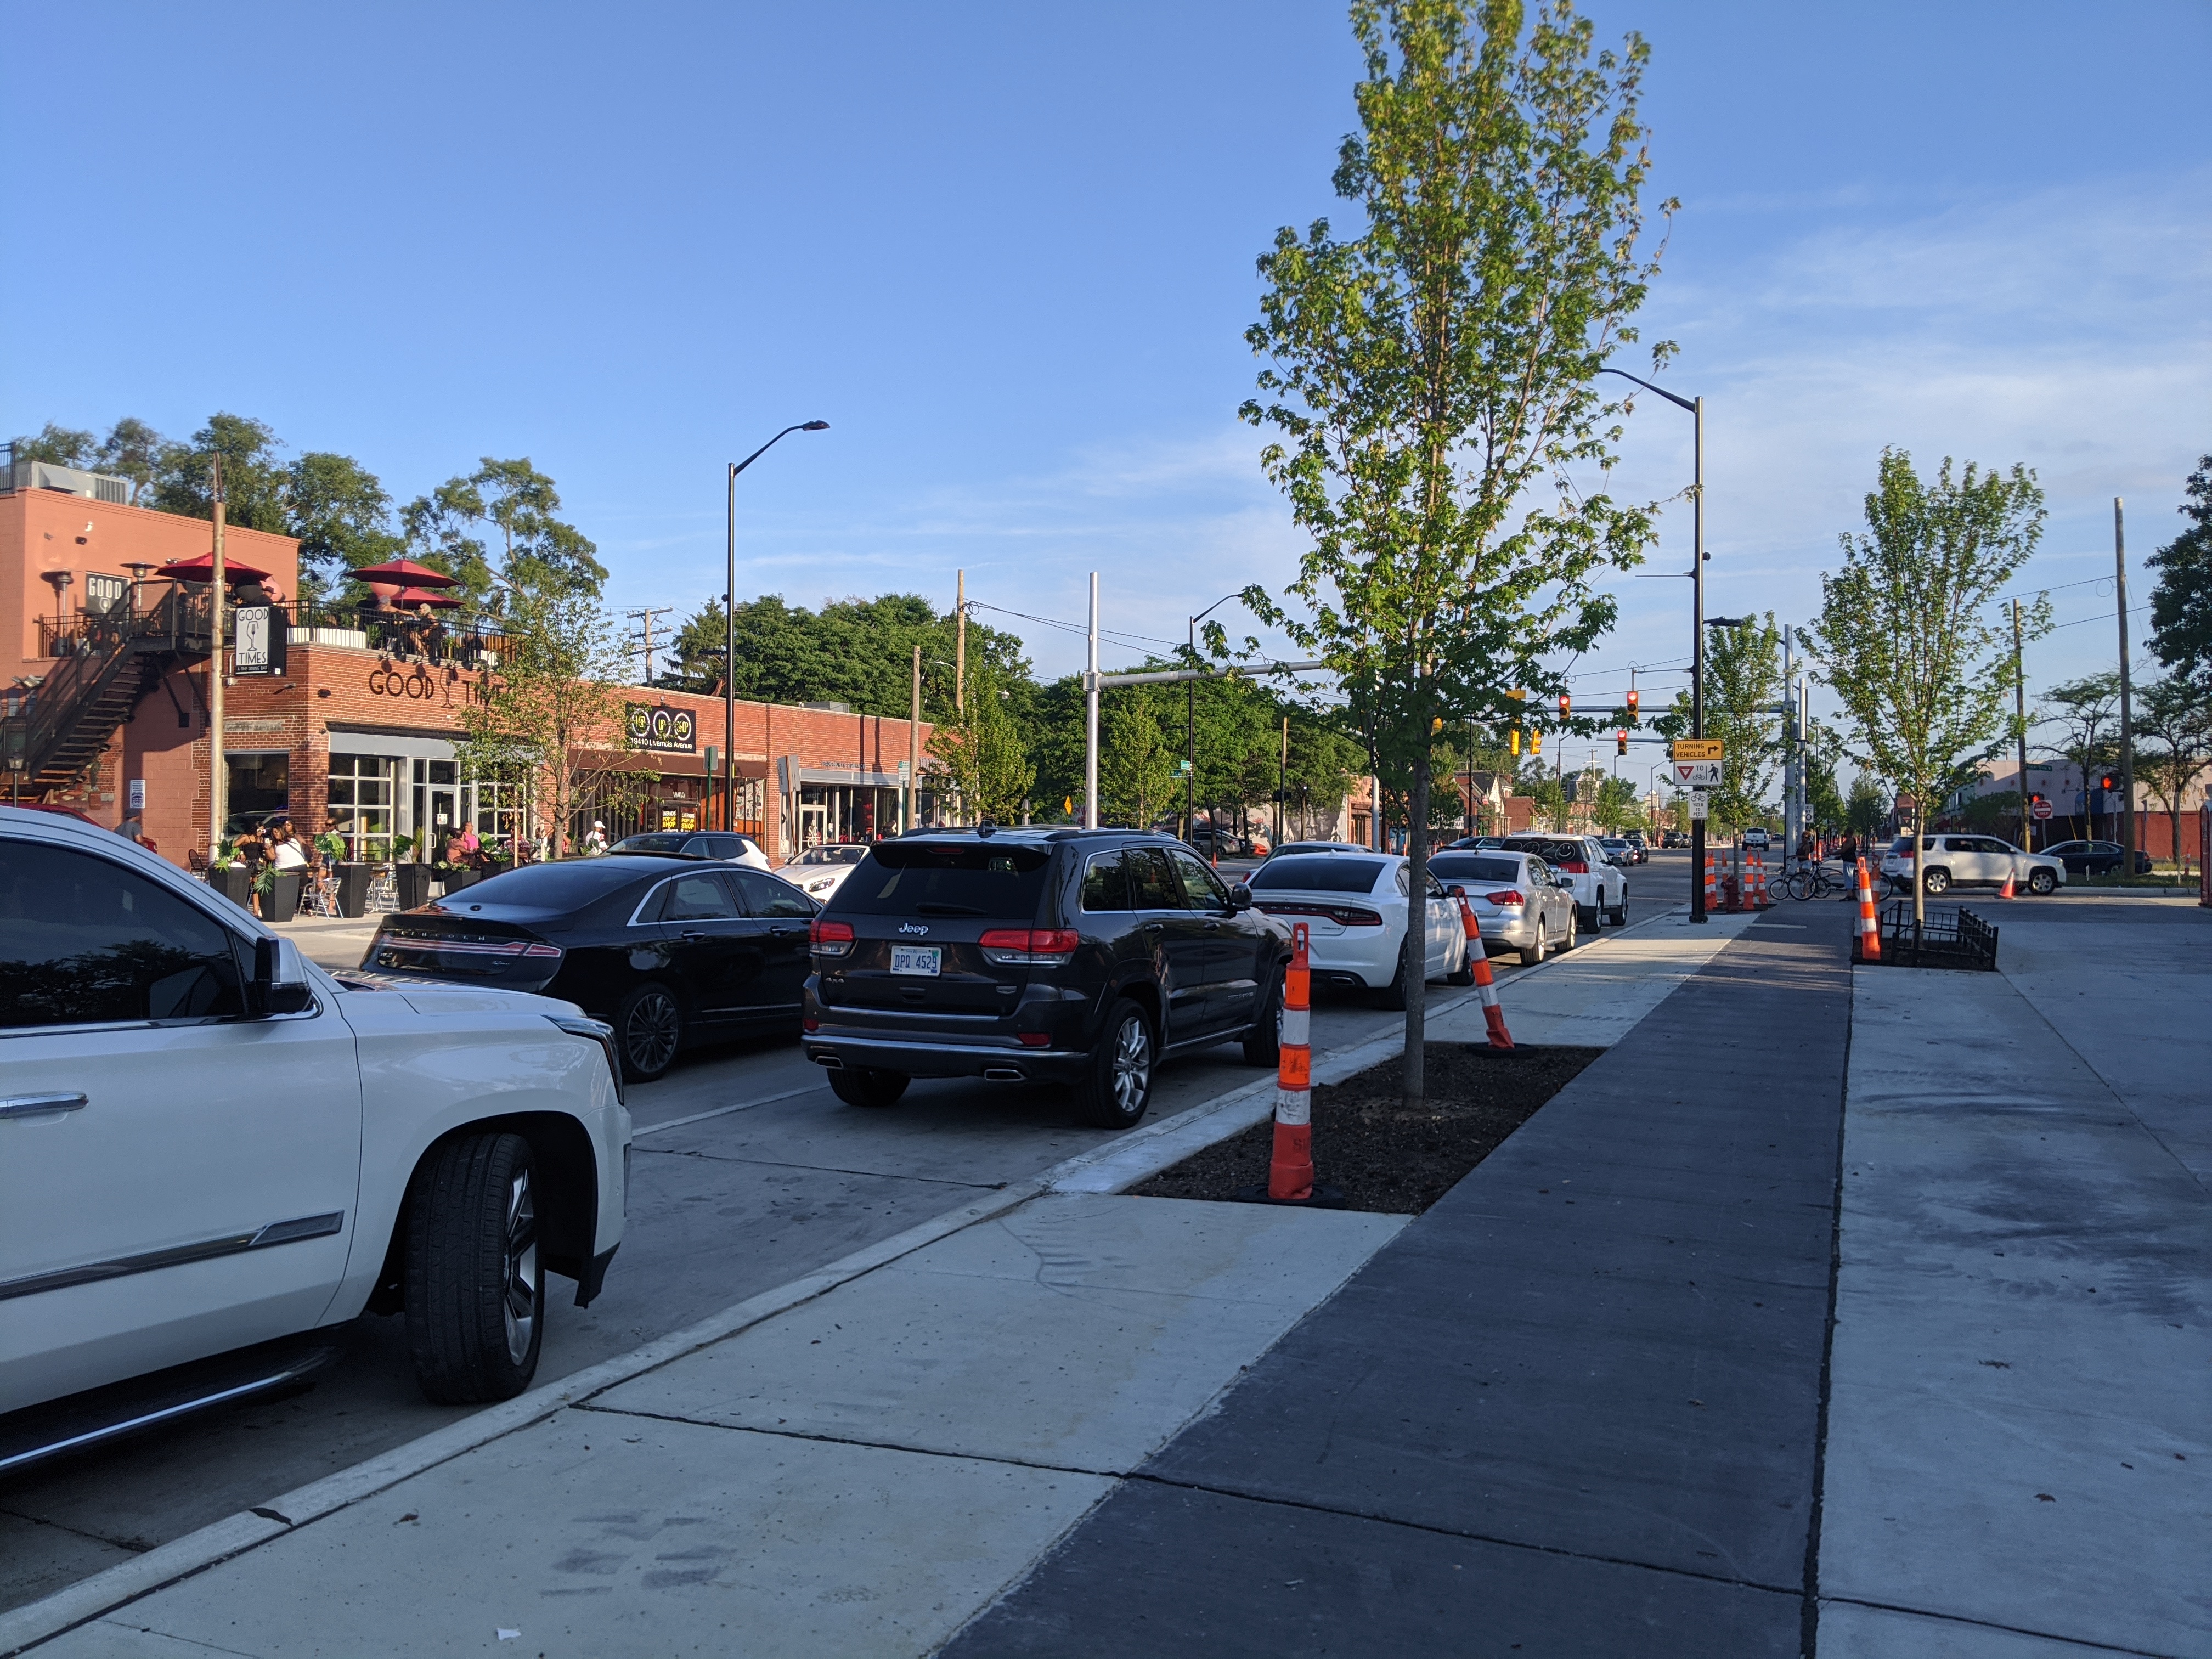 Sidewalk-level bike lanes on Livernois are nearly complete